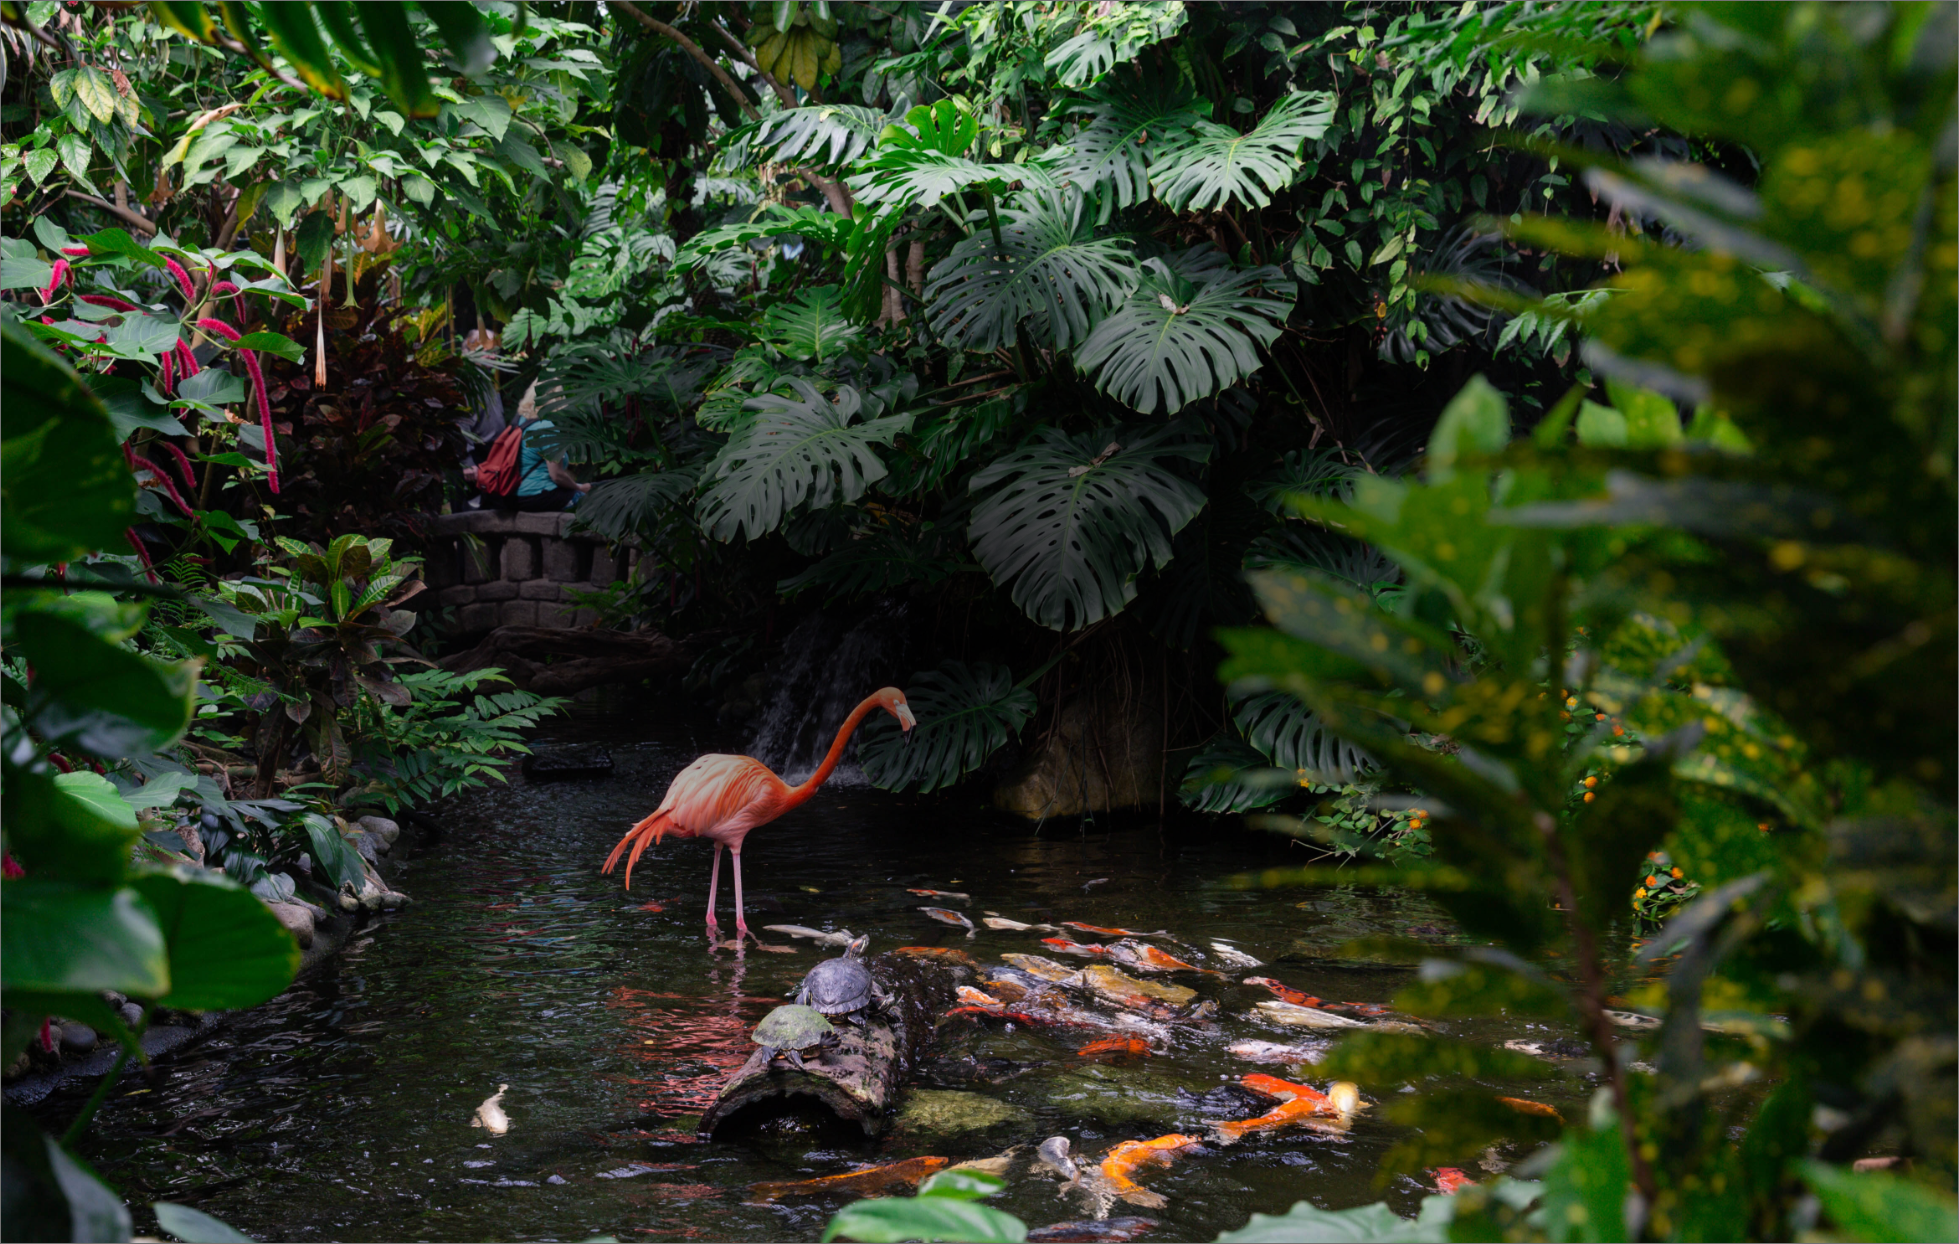 A photograph of the center of the Victoria Butterfly Gardens with a flamingo standing in a pond with turtles, plants, flowers, and koi fish all around. 